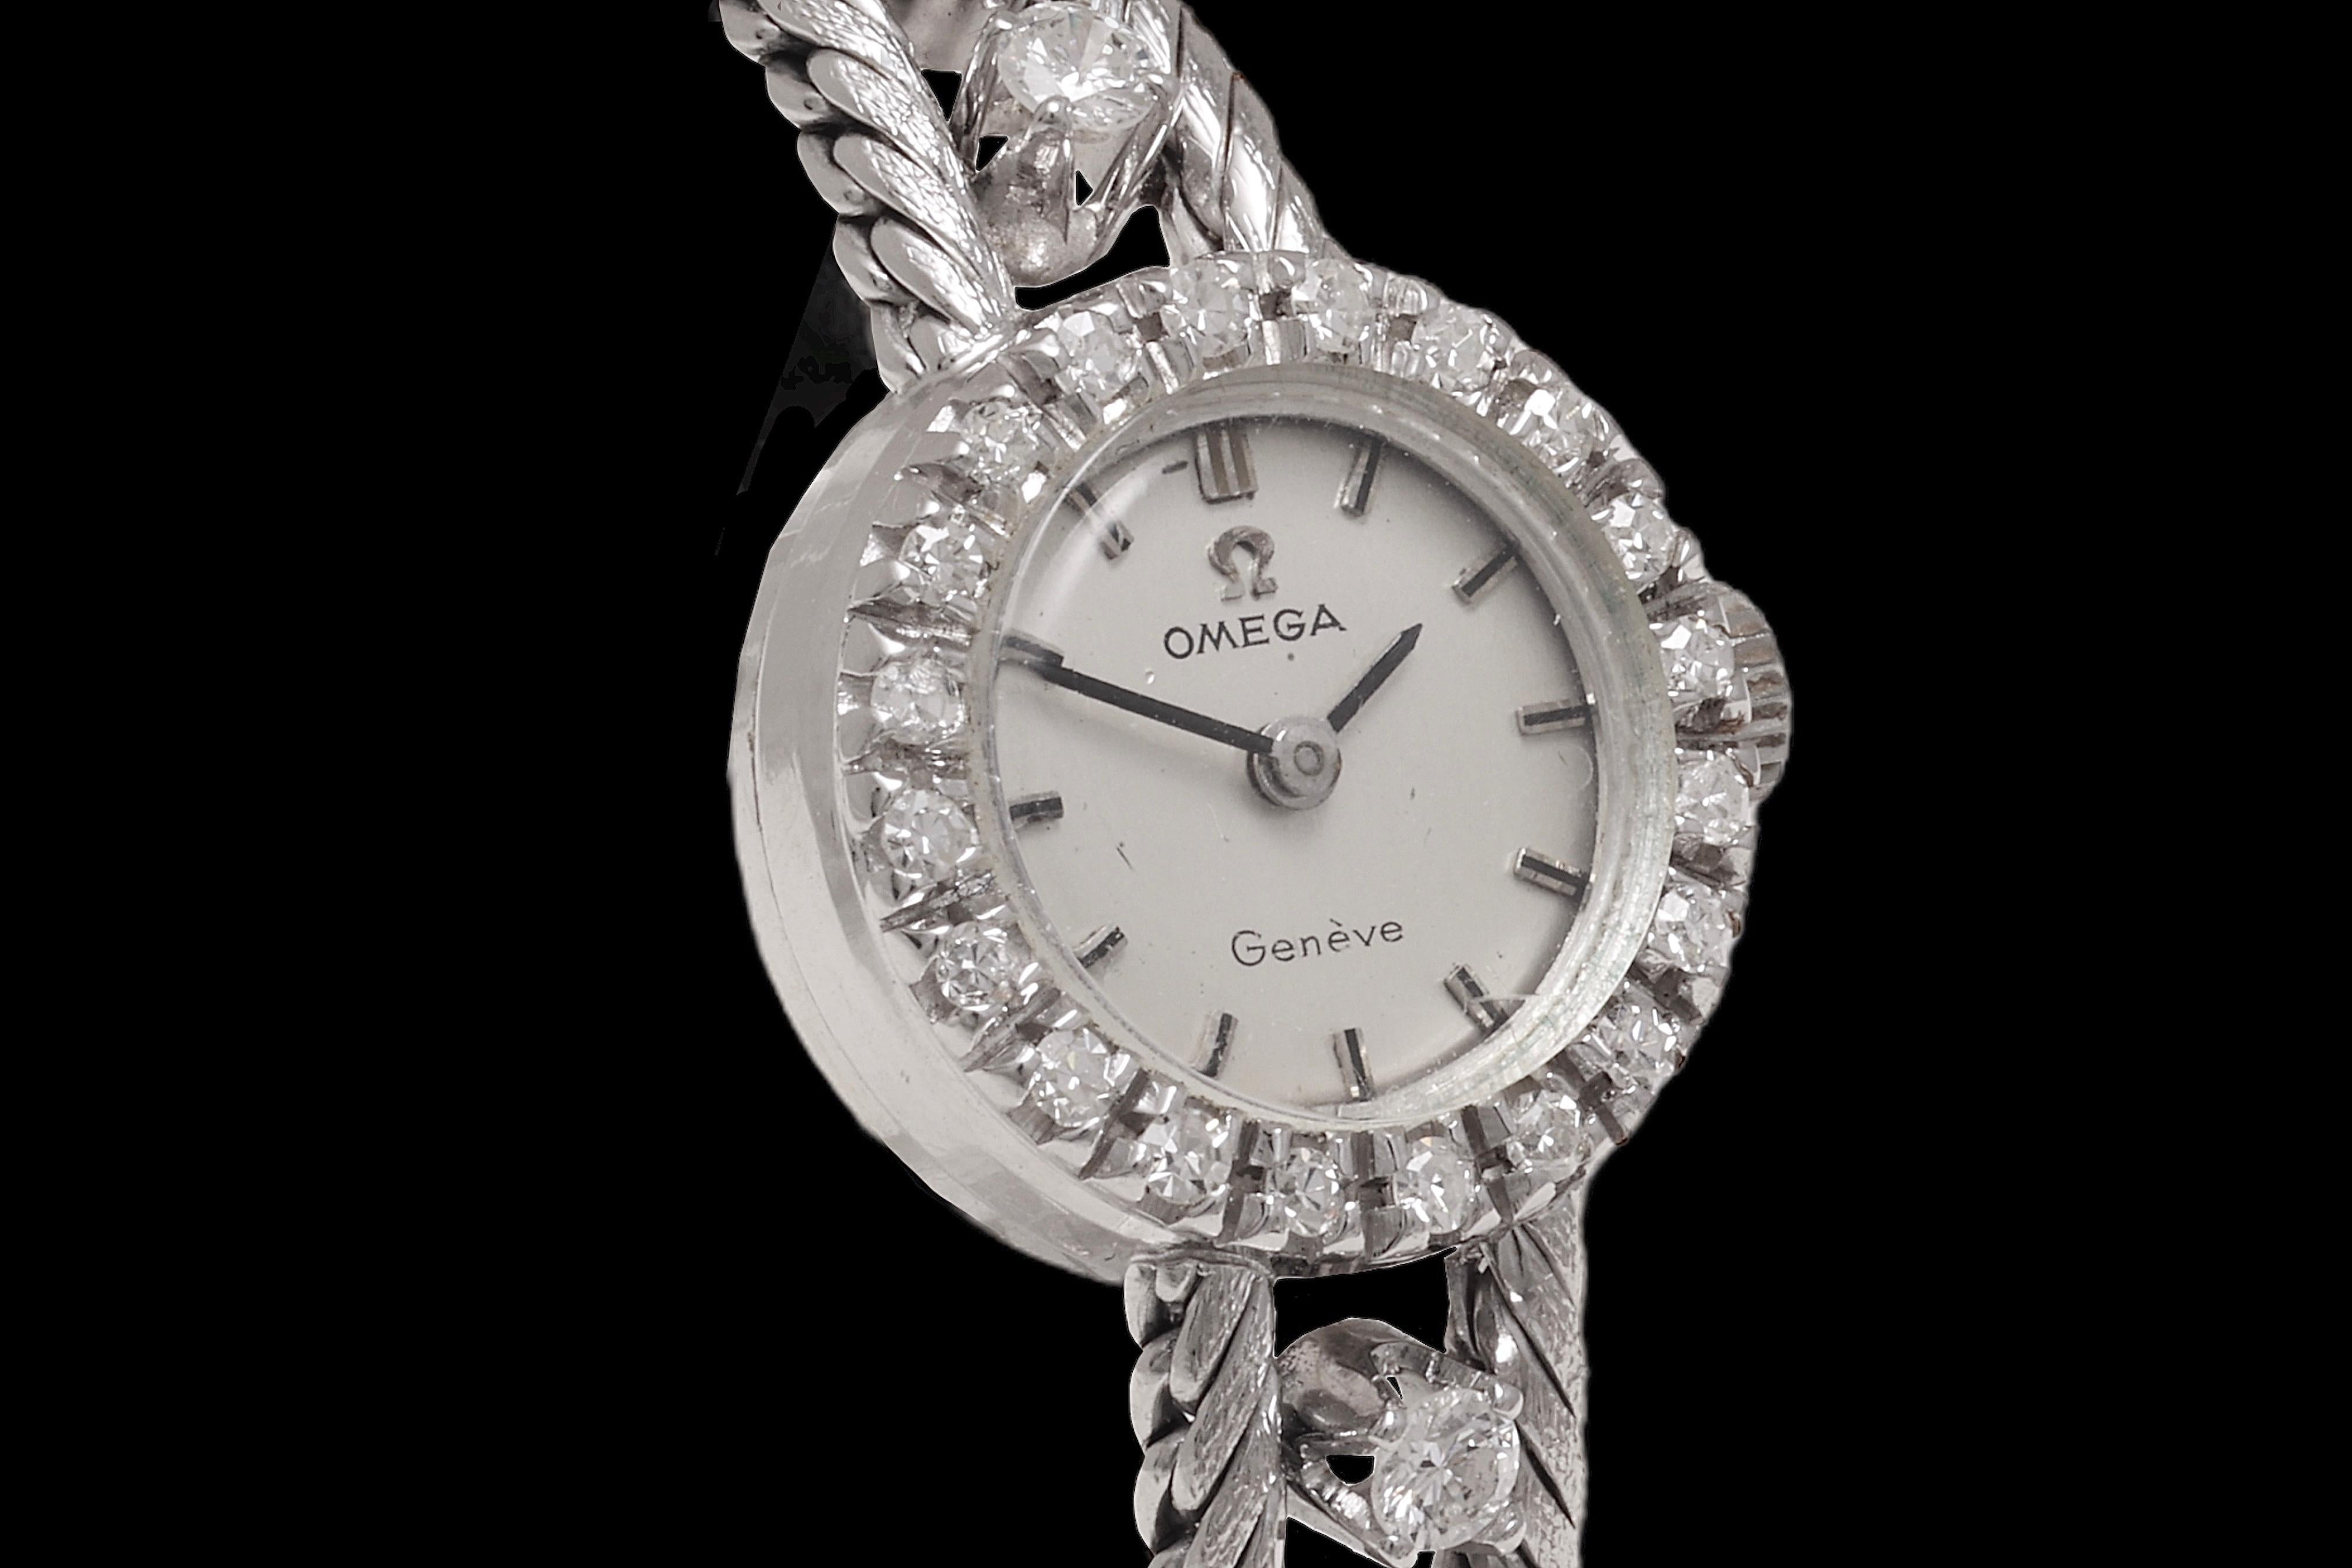 18 kt. White Gold Omega Ladies Automatic Wristwatch with together 1.32 ct. Diamonds

Movement: Automatic

Case: diameter 17.1 mm, thickness 7.1 mm, with diamond bezel together 0.40 ct.

Strap: 18 kt. white gold bracelet strap with together 0.92 ct.